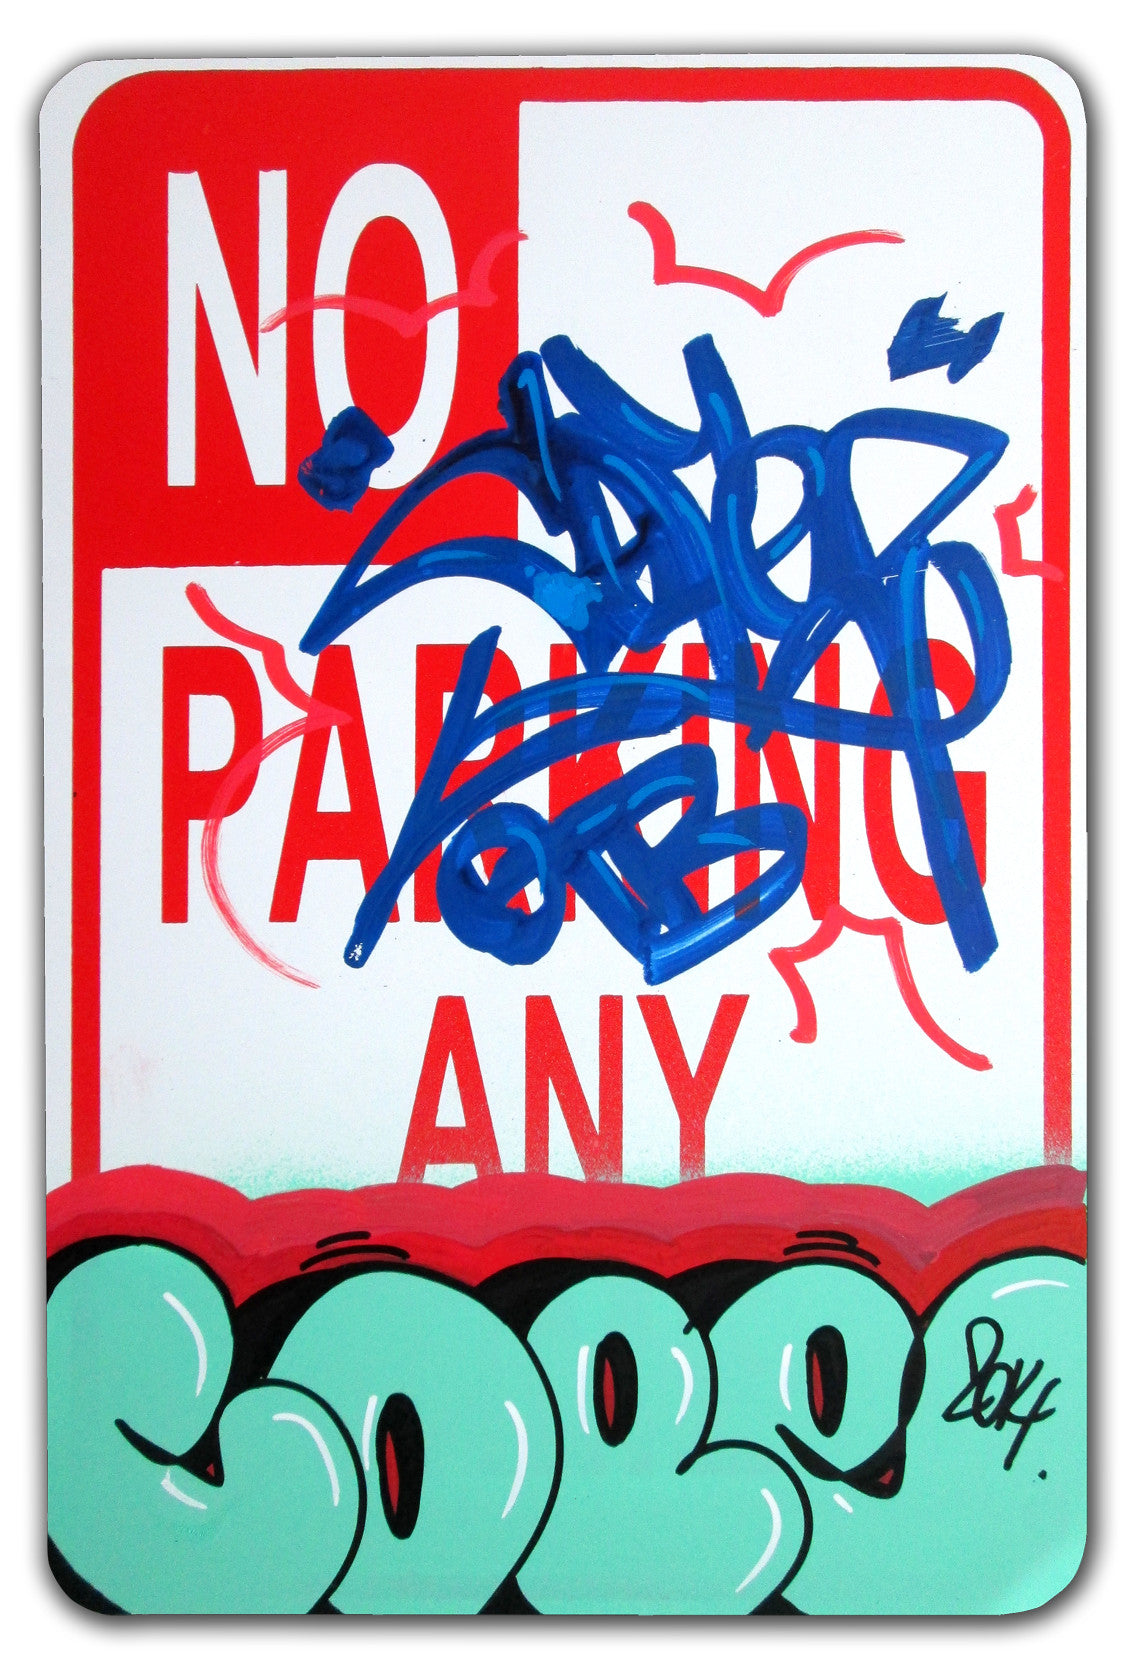 COPE 2 - "Turquoise Classic Bubble #2 " No Parking Sign